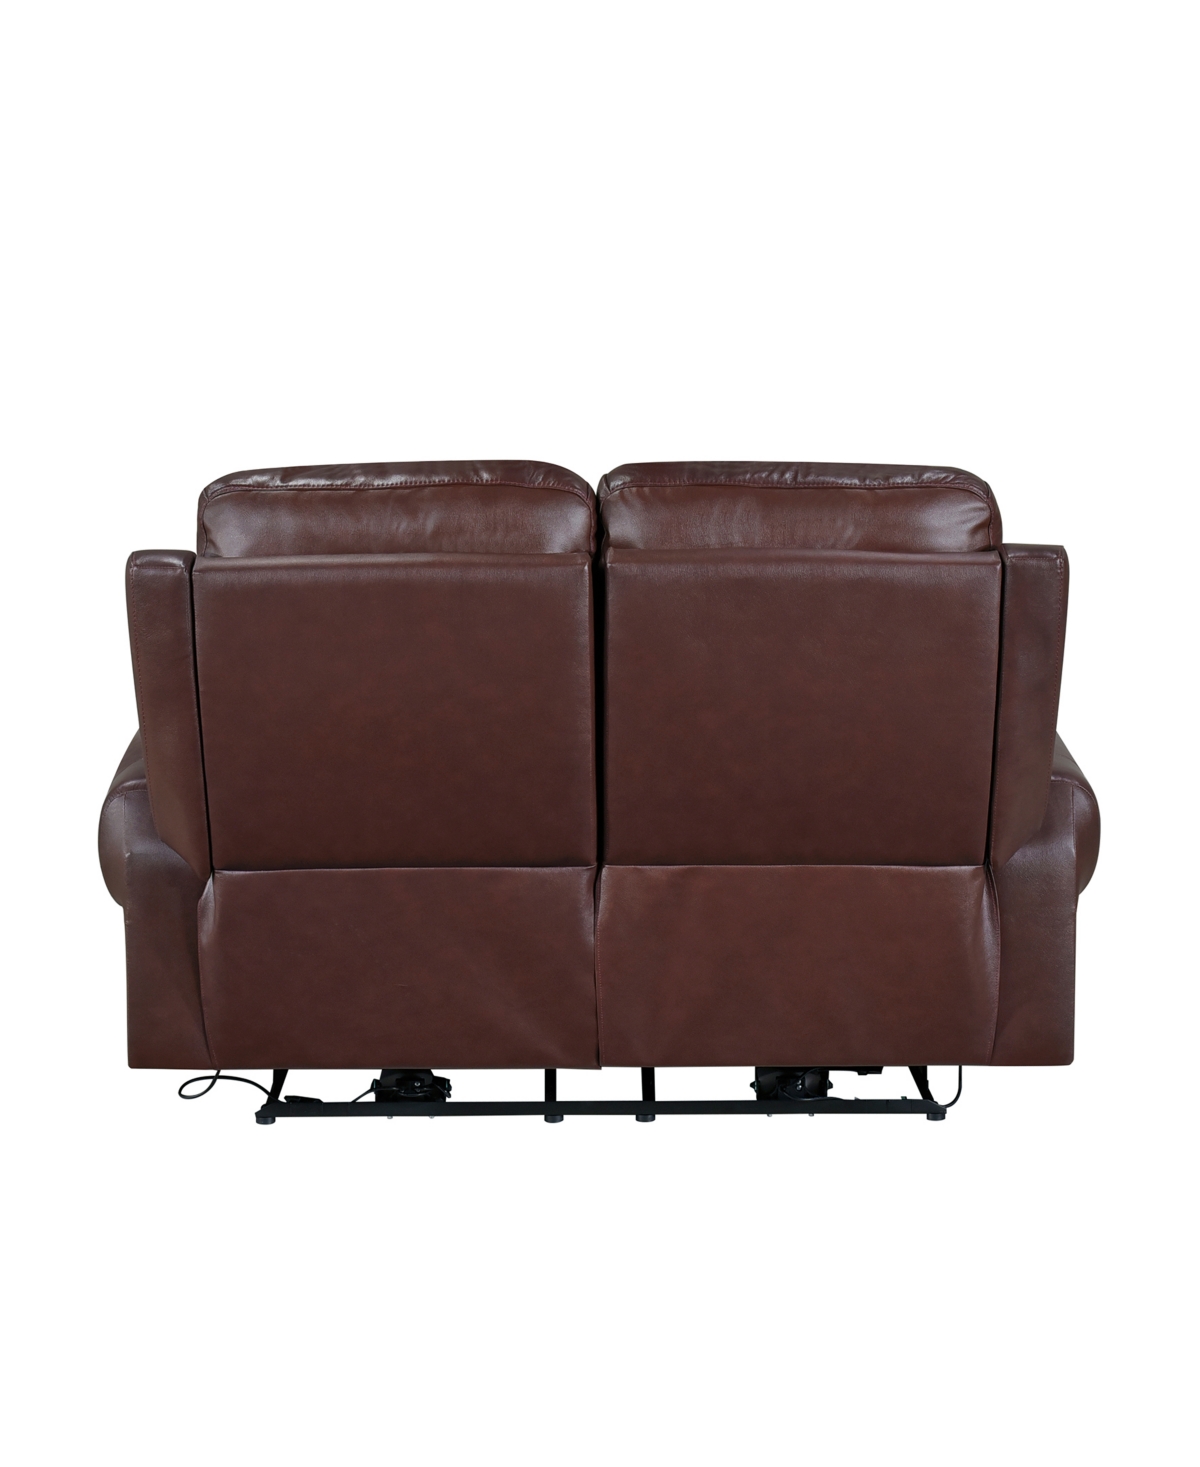 Shop Homelegance White Label Florentina 61" Leather Match Power With Power Headrests Double Reclining Love Seat In Brown